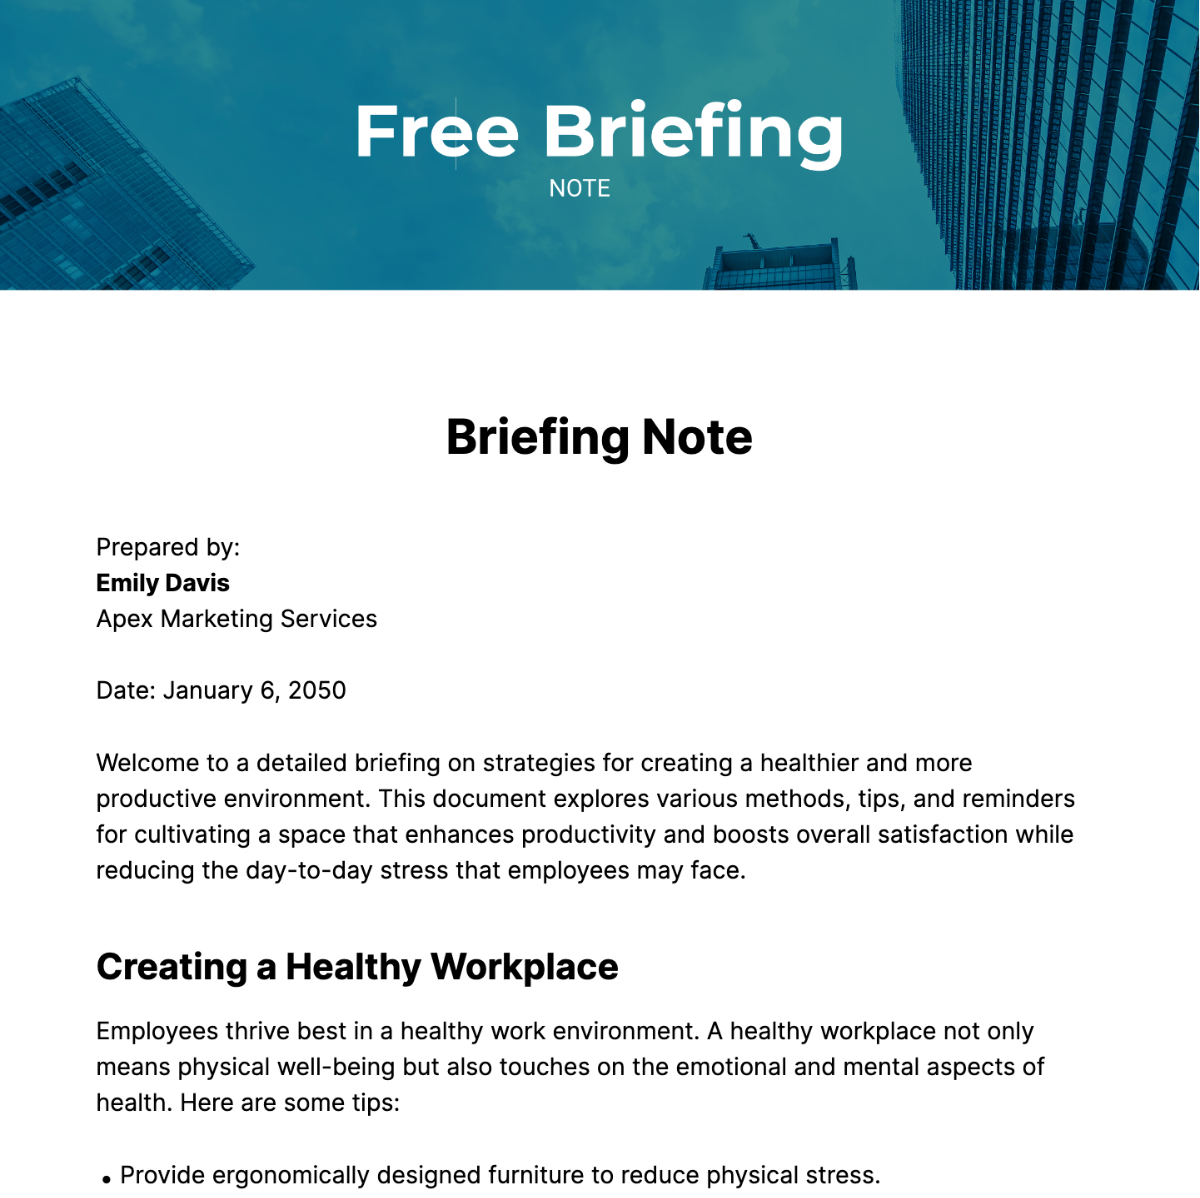 Free Briefing Note Template